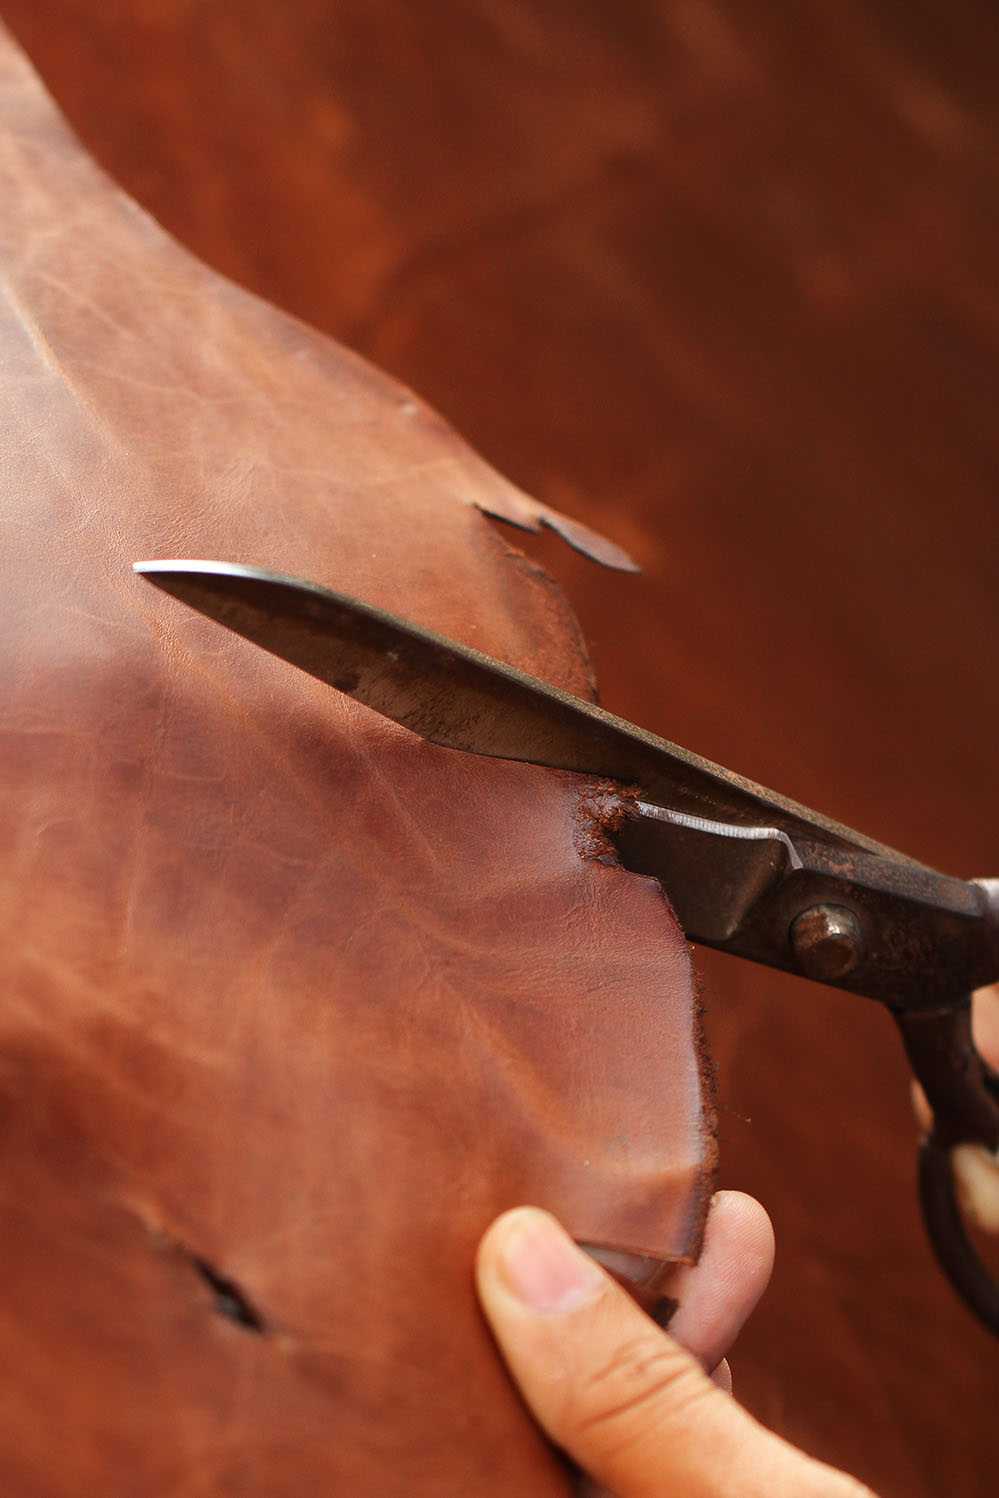 Close up image of a hand holding scissors and cutting leather.